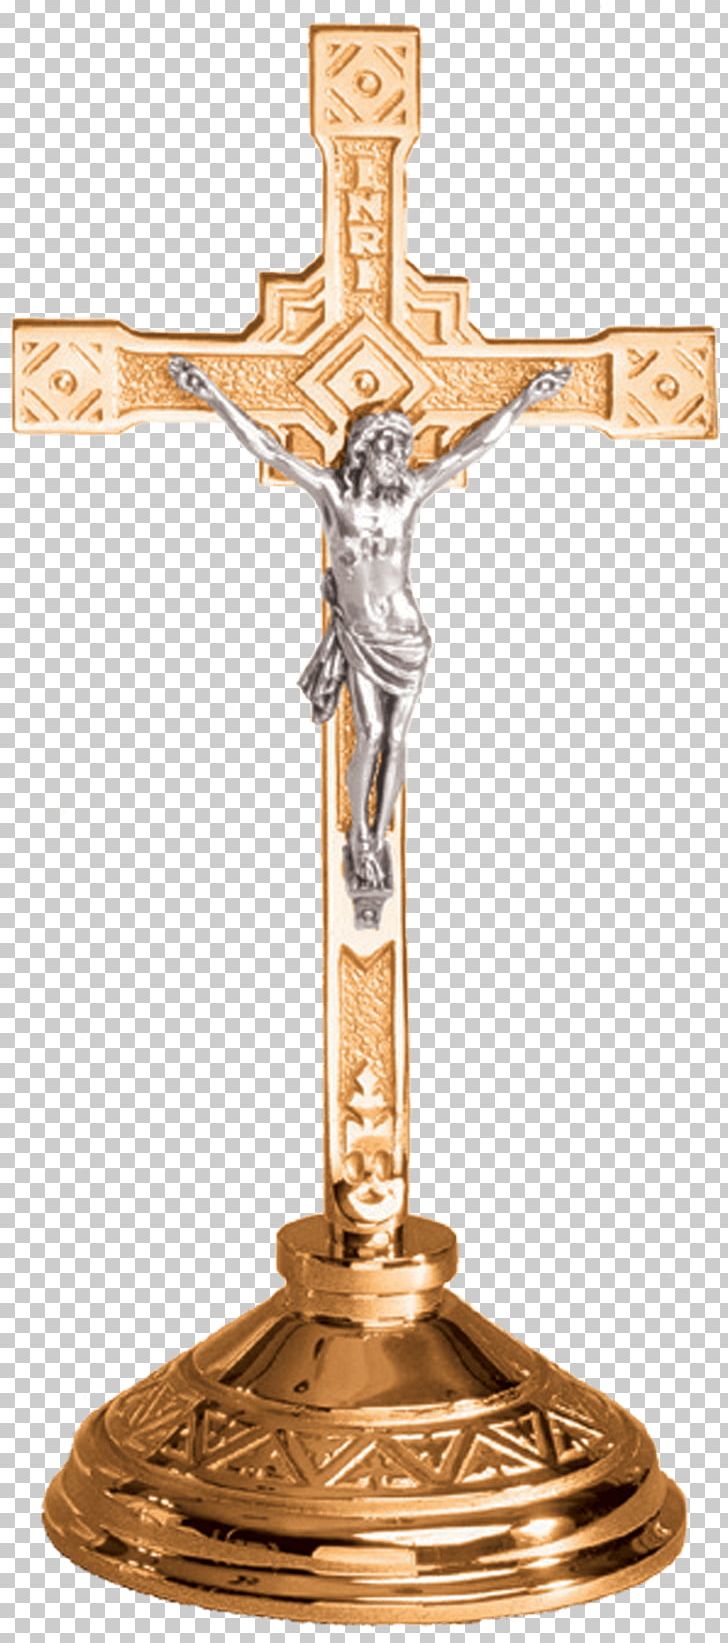 Altar Crucifix Cross Church PNG, Clipart, Altar, Altar Crucifix, Artifact, Autom, Autom Church Supply Company Free PNG Download